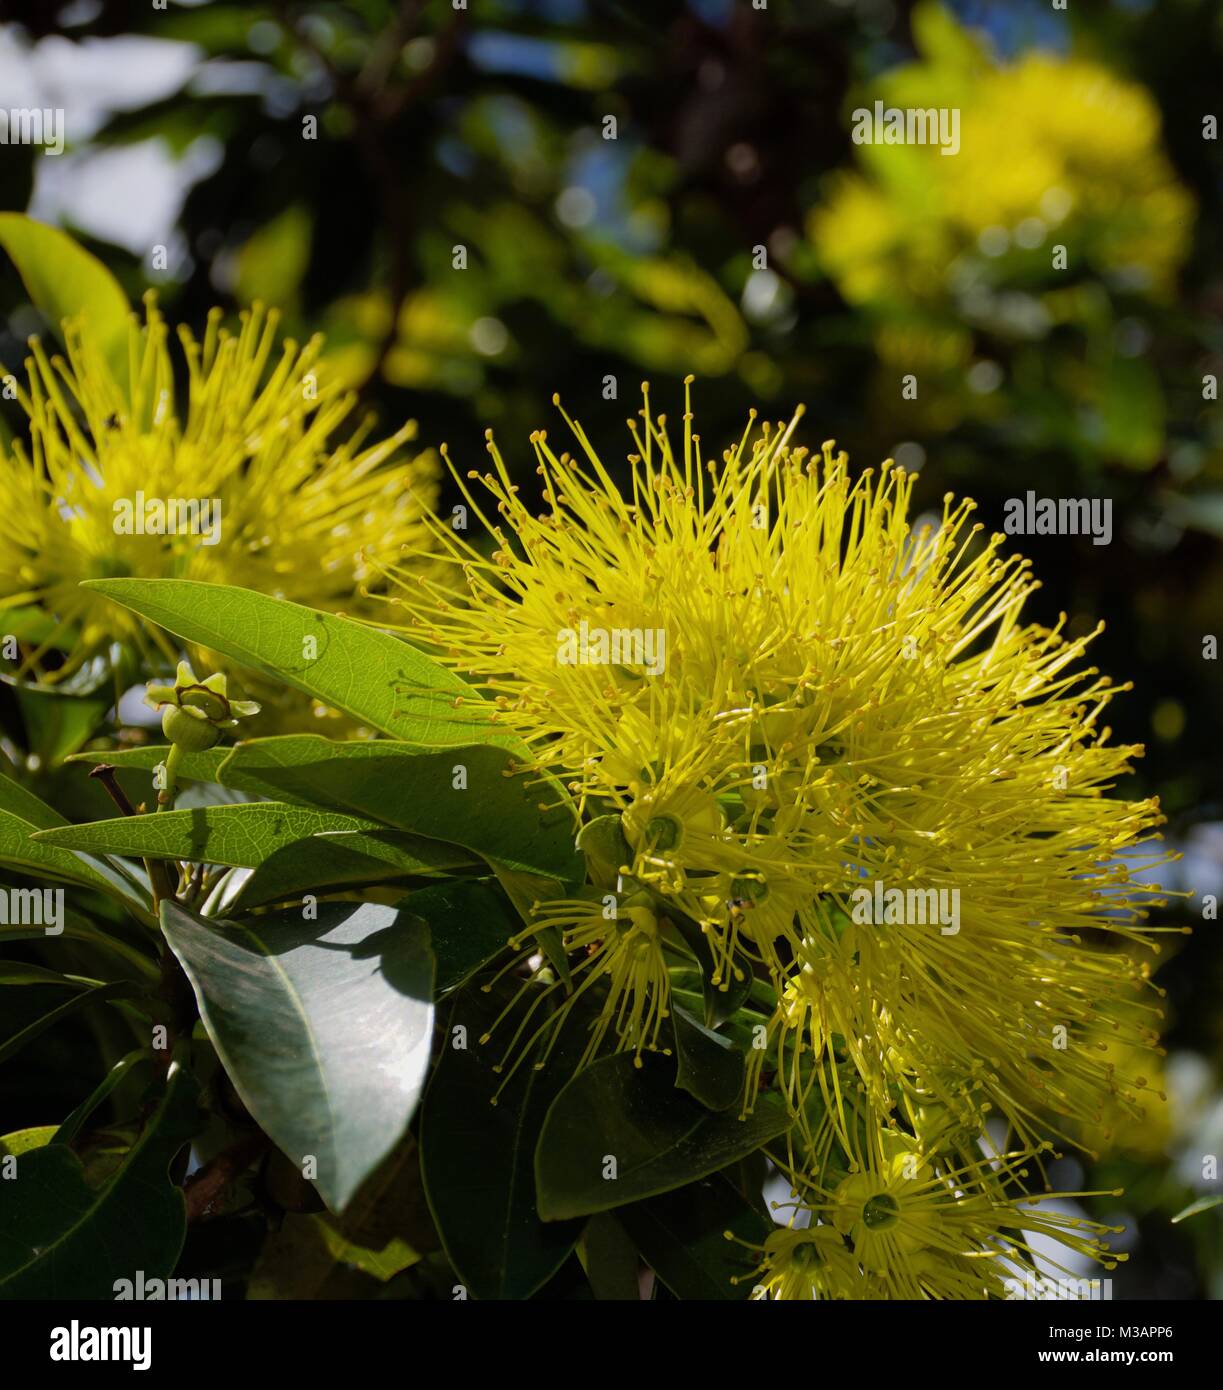 Xanthostemon chrysanthus, commonly named golden penda, a flowering rainforest tree native to tropical North Queensland Australia Stock Photo